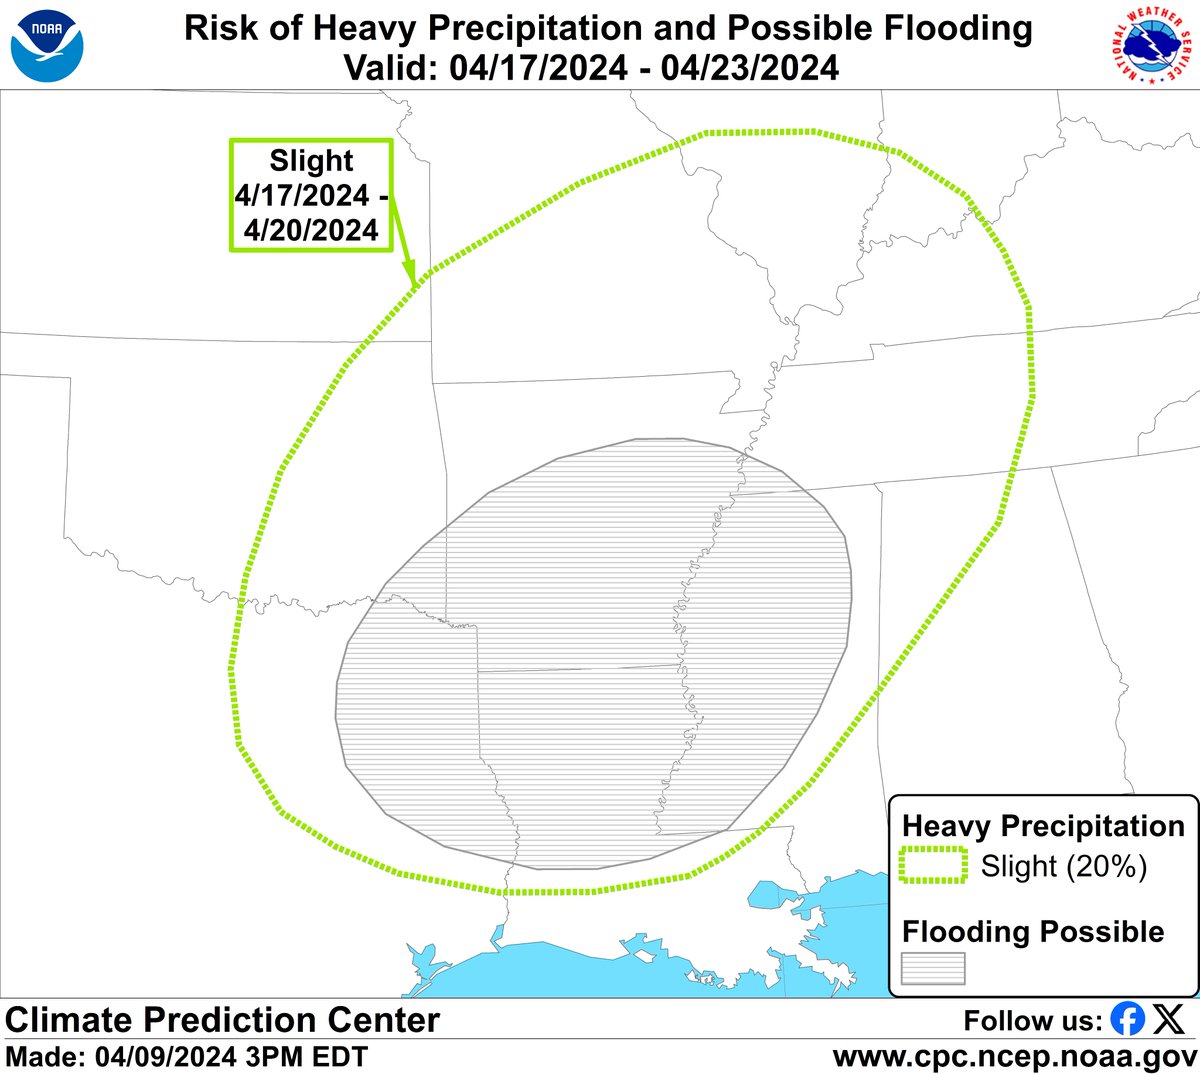 Following an anticipated period of heavy rainfall this week, there is increased potential for additional periods of heavy precipitation next week which may exacerbate ongoing flooding impacts in parts of TX, OK, and much of the Lower Mississippi Valley. cpc.ncep.noaa.gov